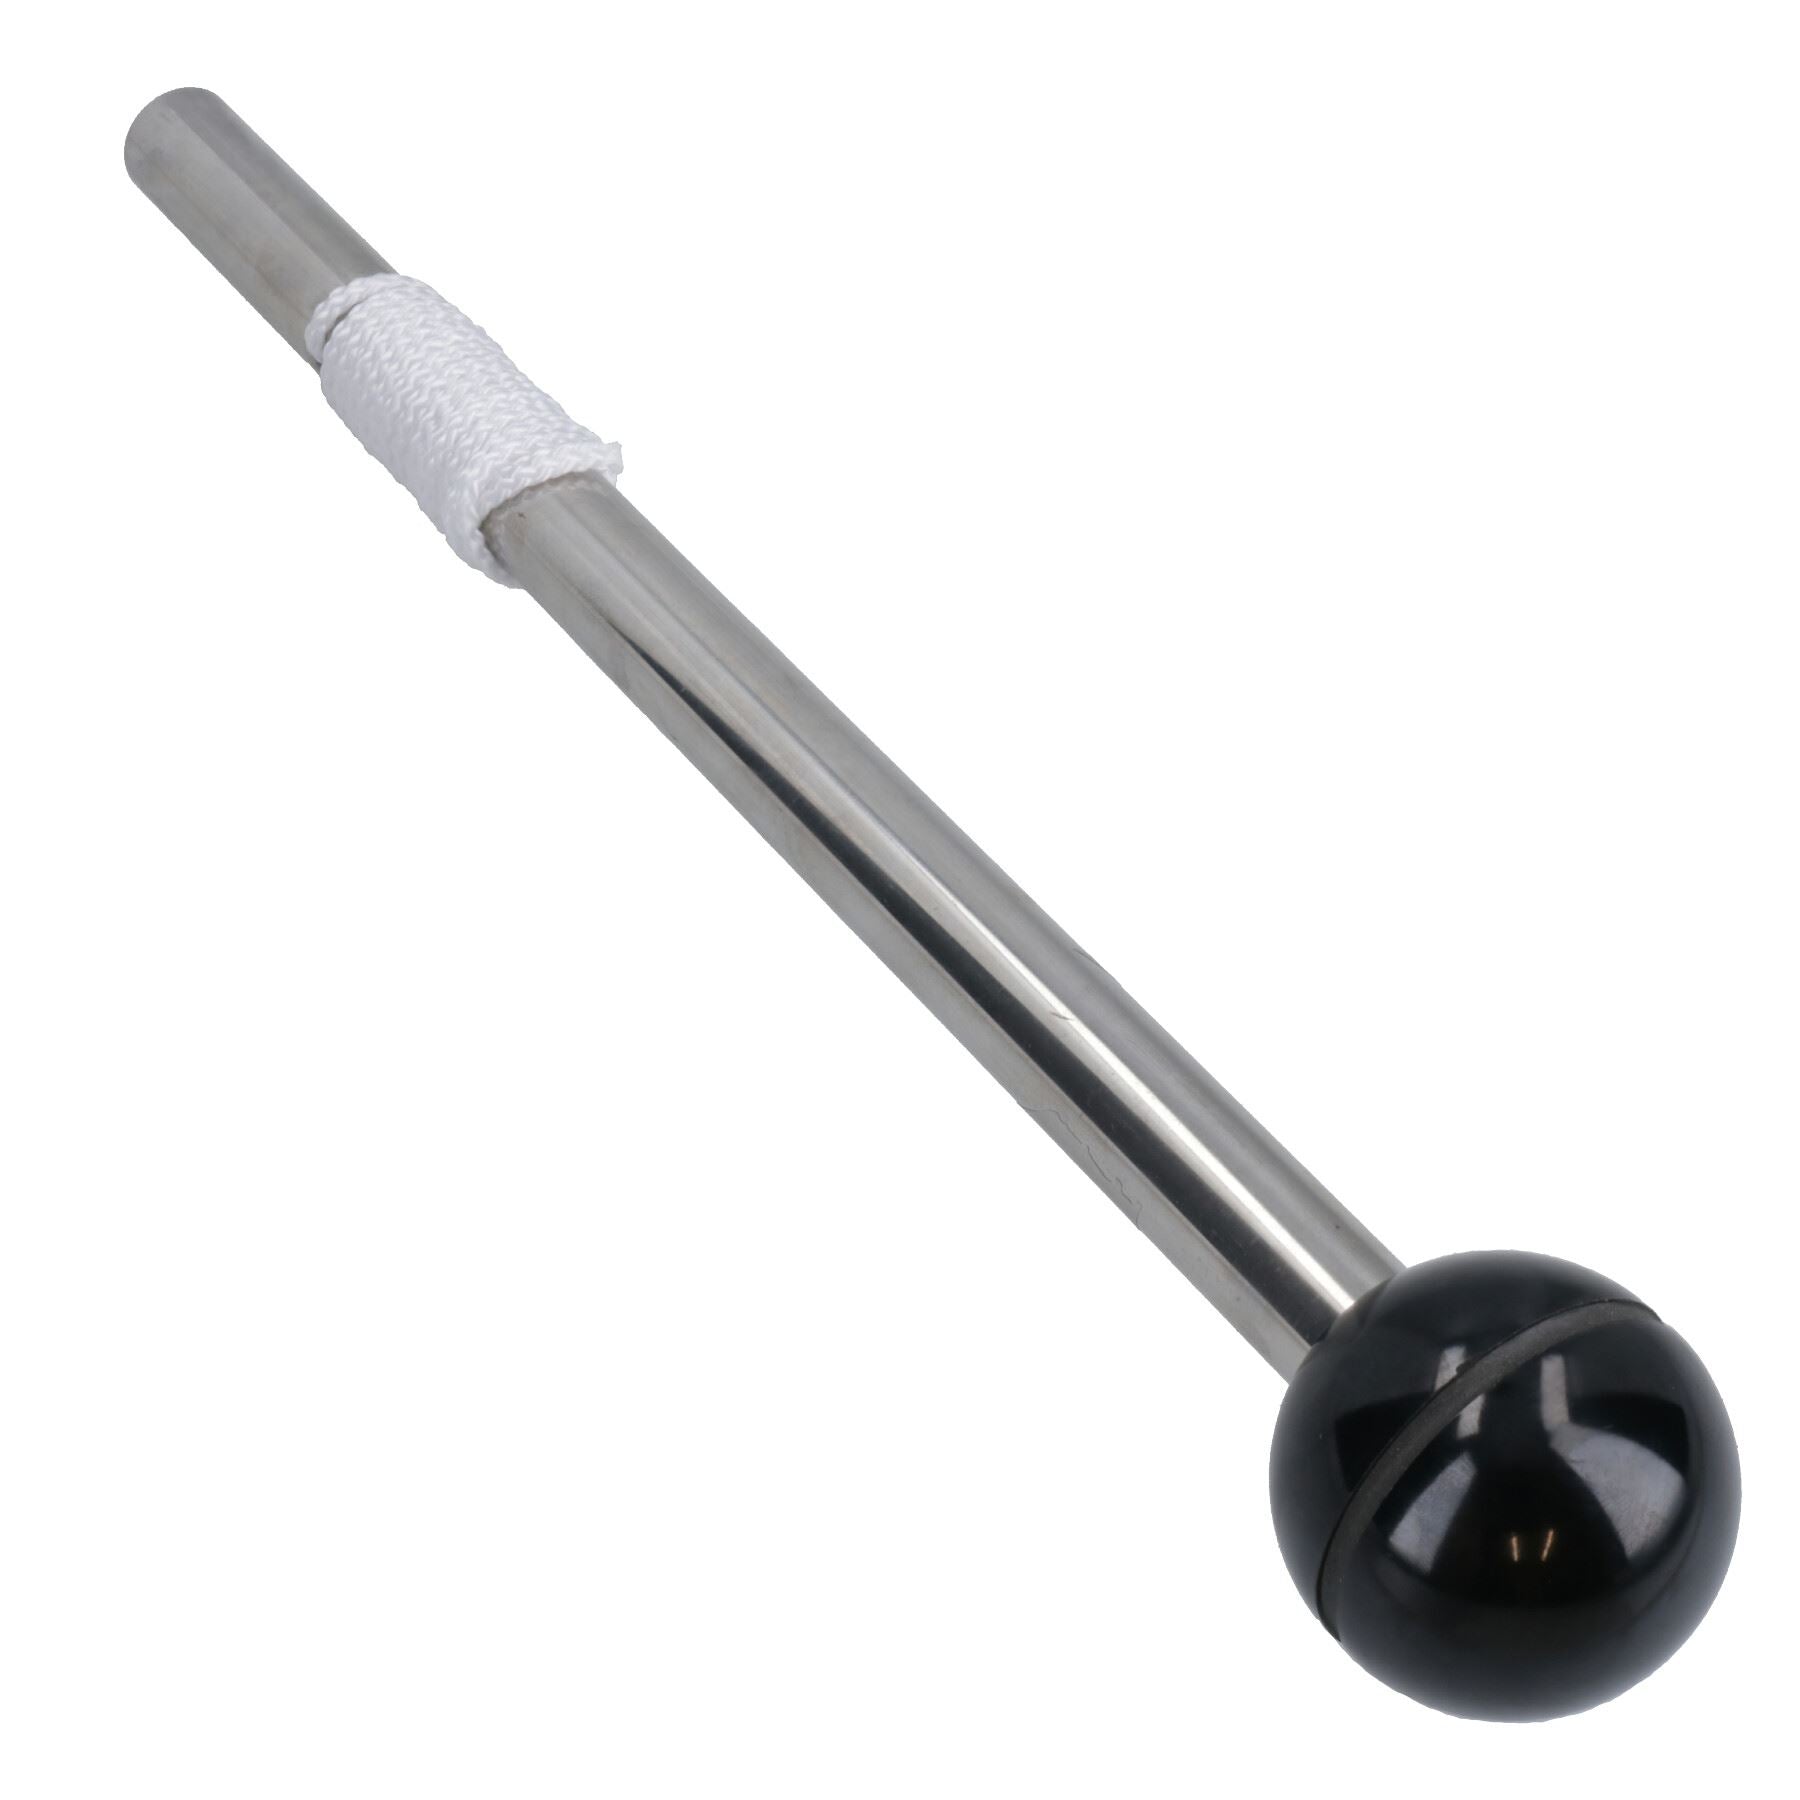 Replacement Handle Manual Whale Gusher & Titan Bilge Pump Stainless Steel